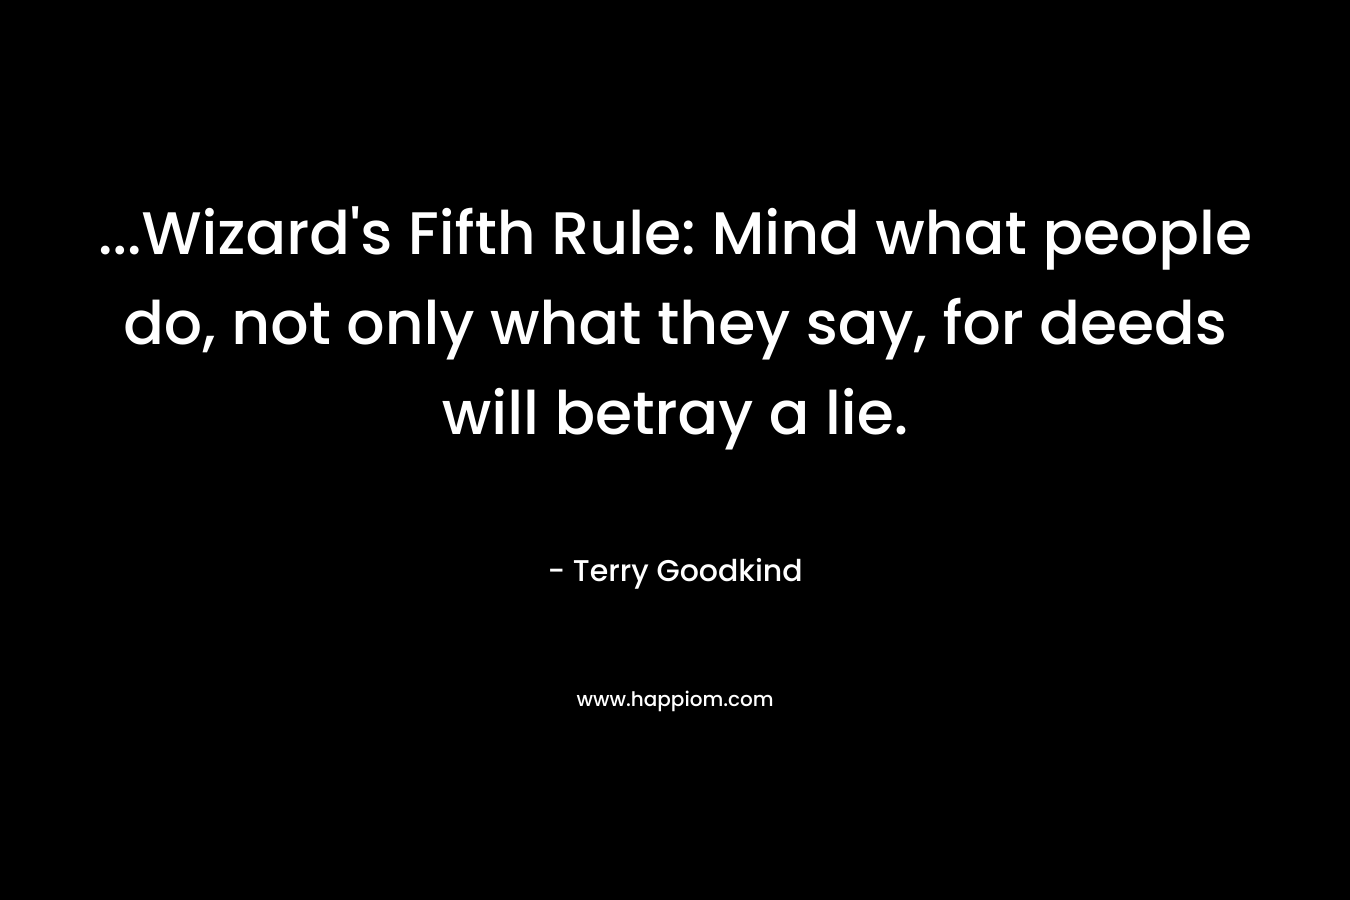 ...Wizard's Fifth Rule: Mind what people do, not only what they say, for deeds will betray a lie.